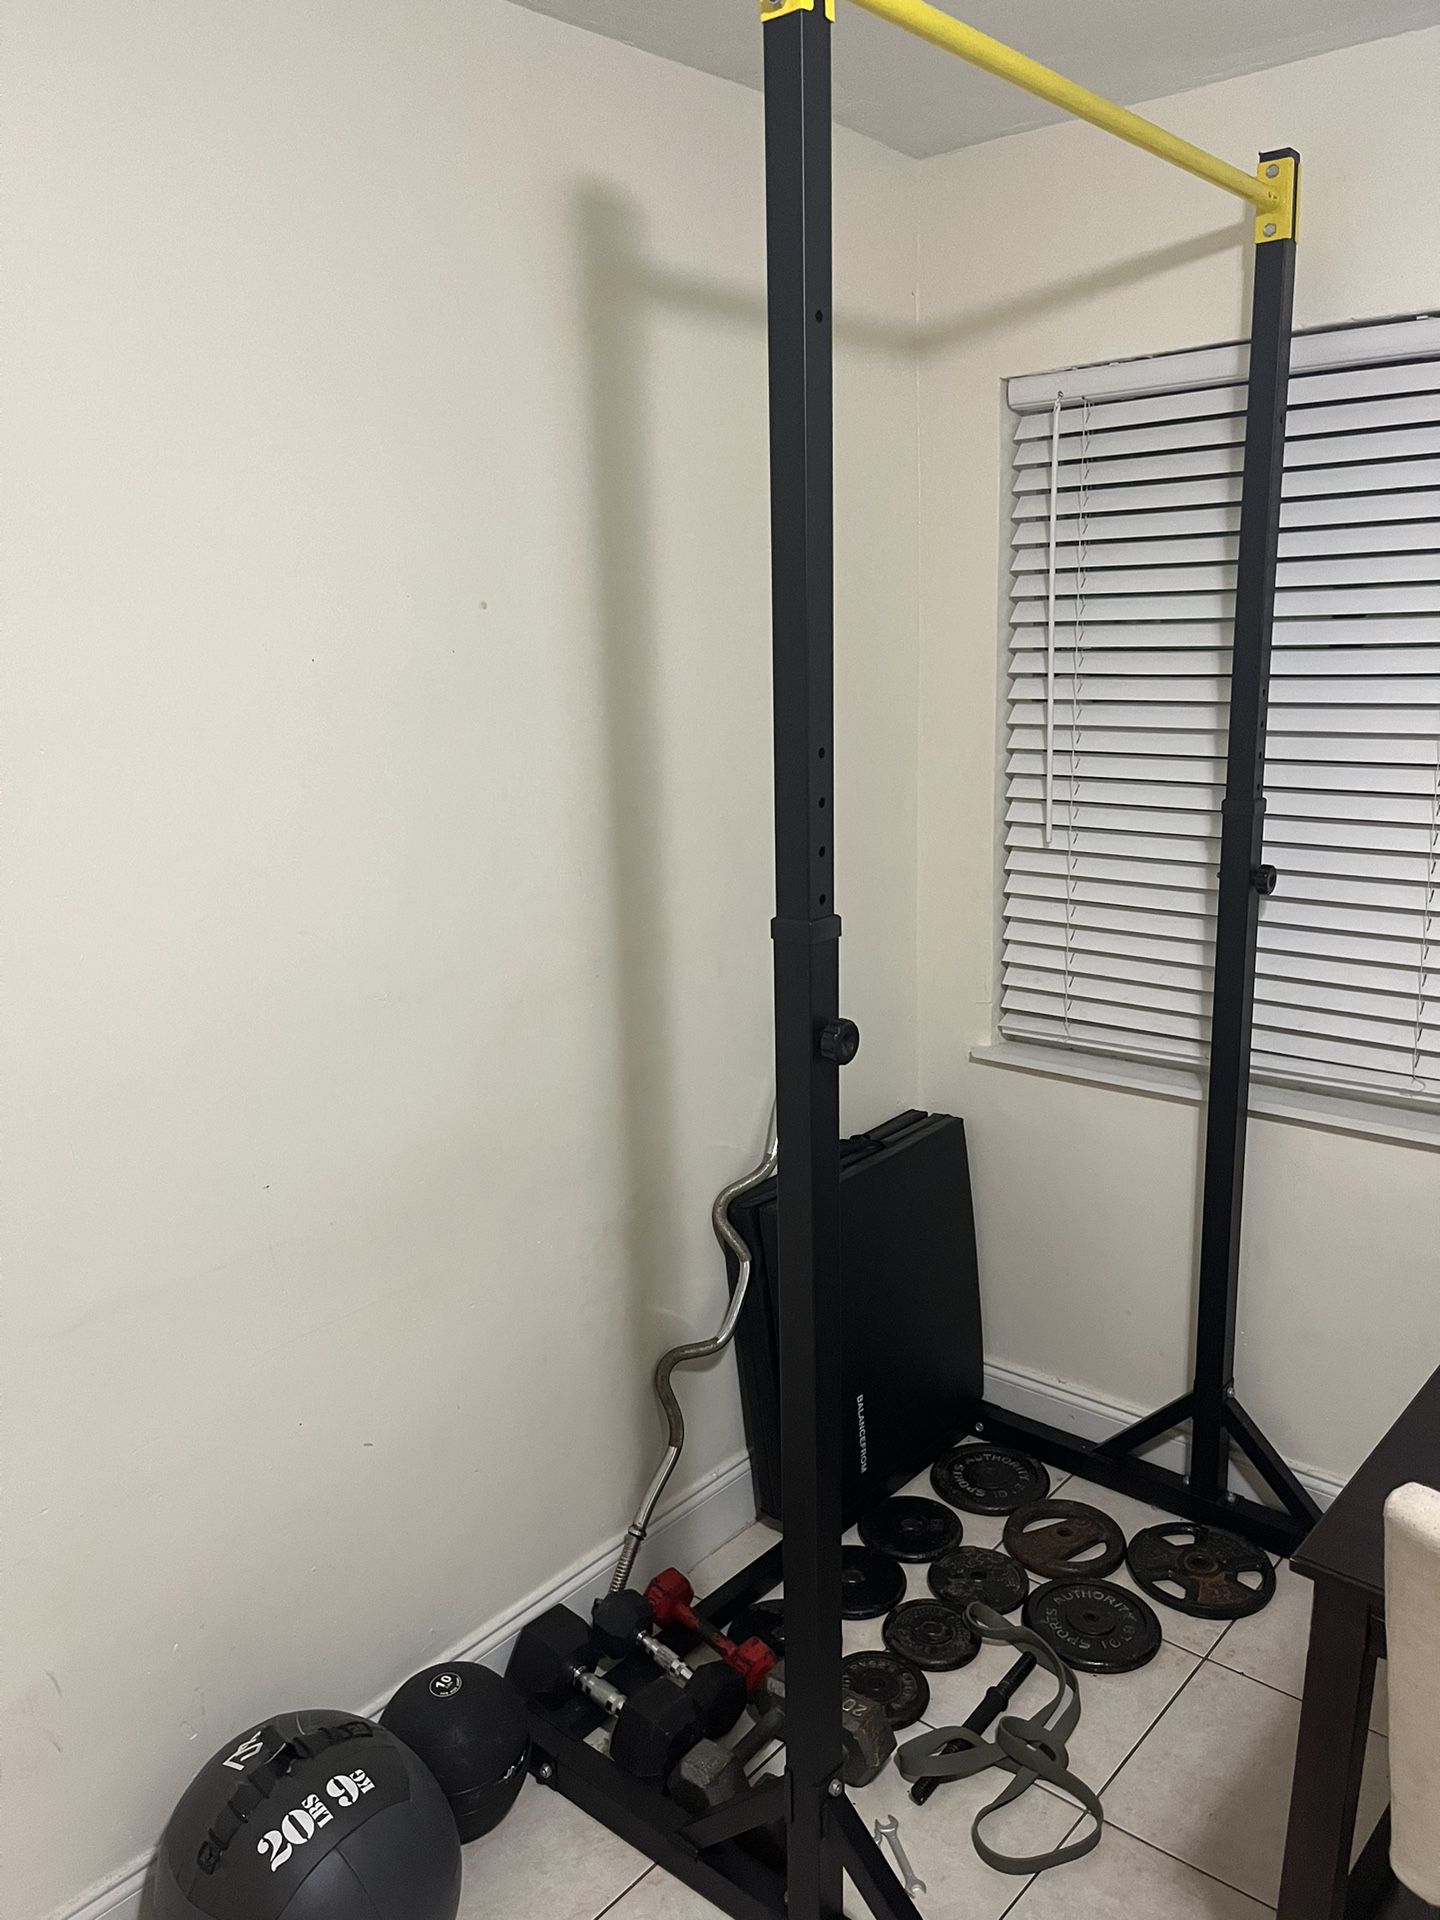 Pull Up Bar, Curl bar, Weights, Plates, Dumbbells 